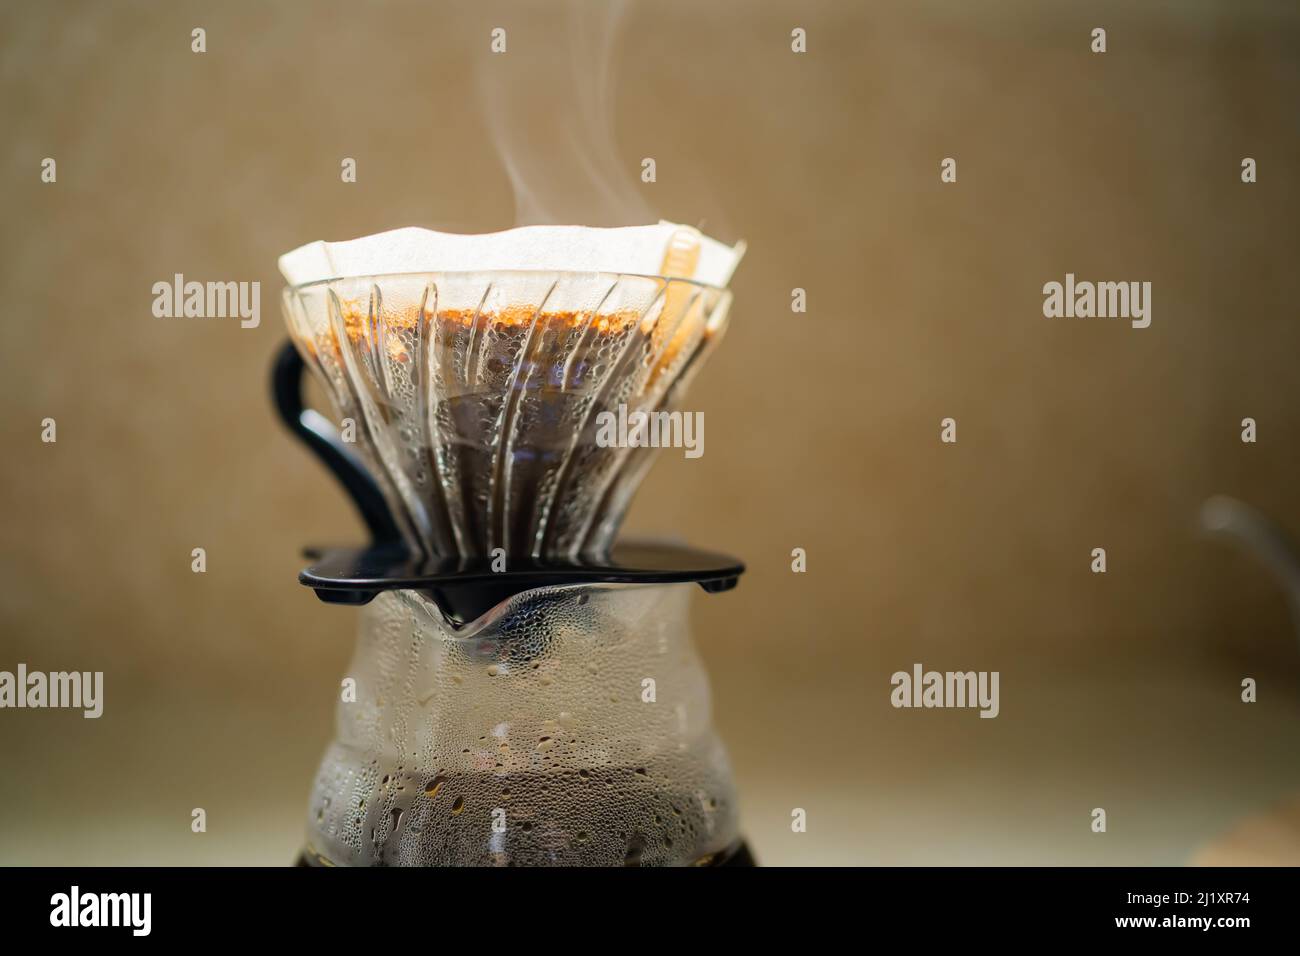 Coffee dripper and carafe with steam Stock Photo